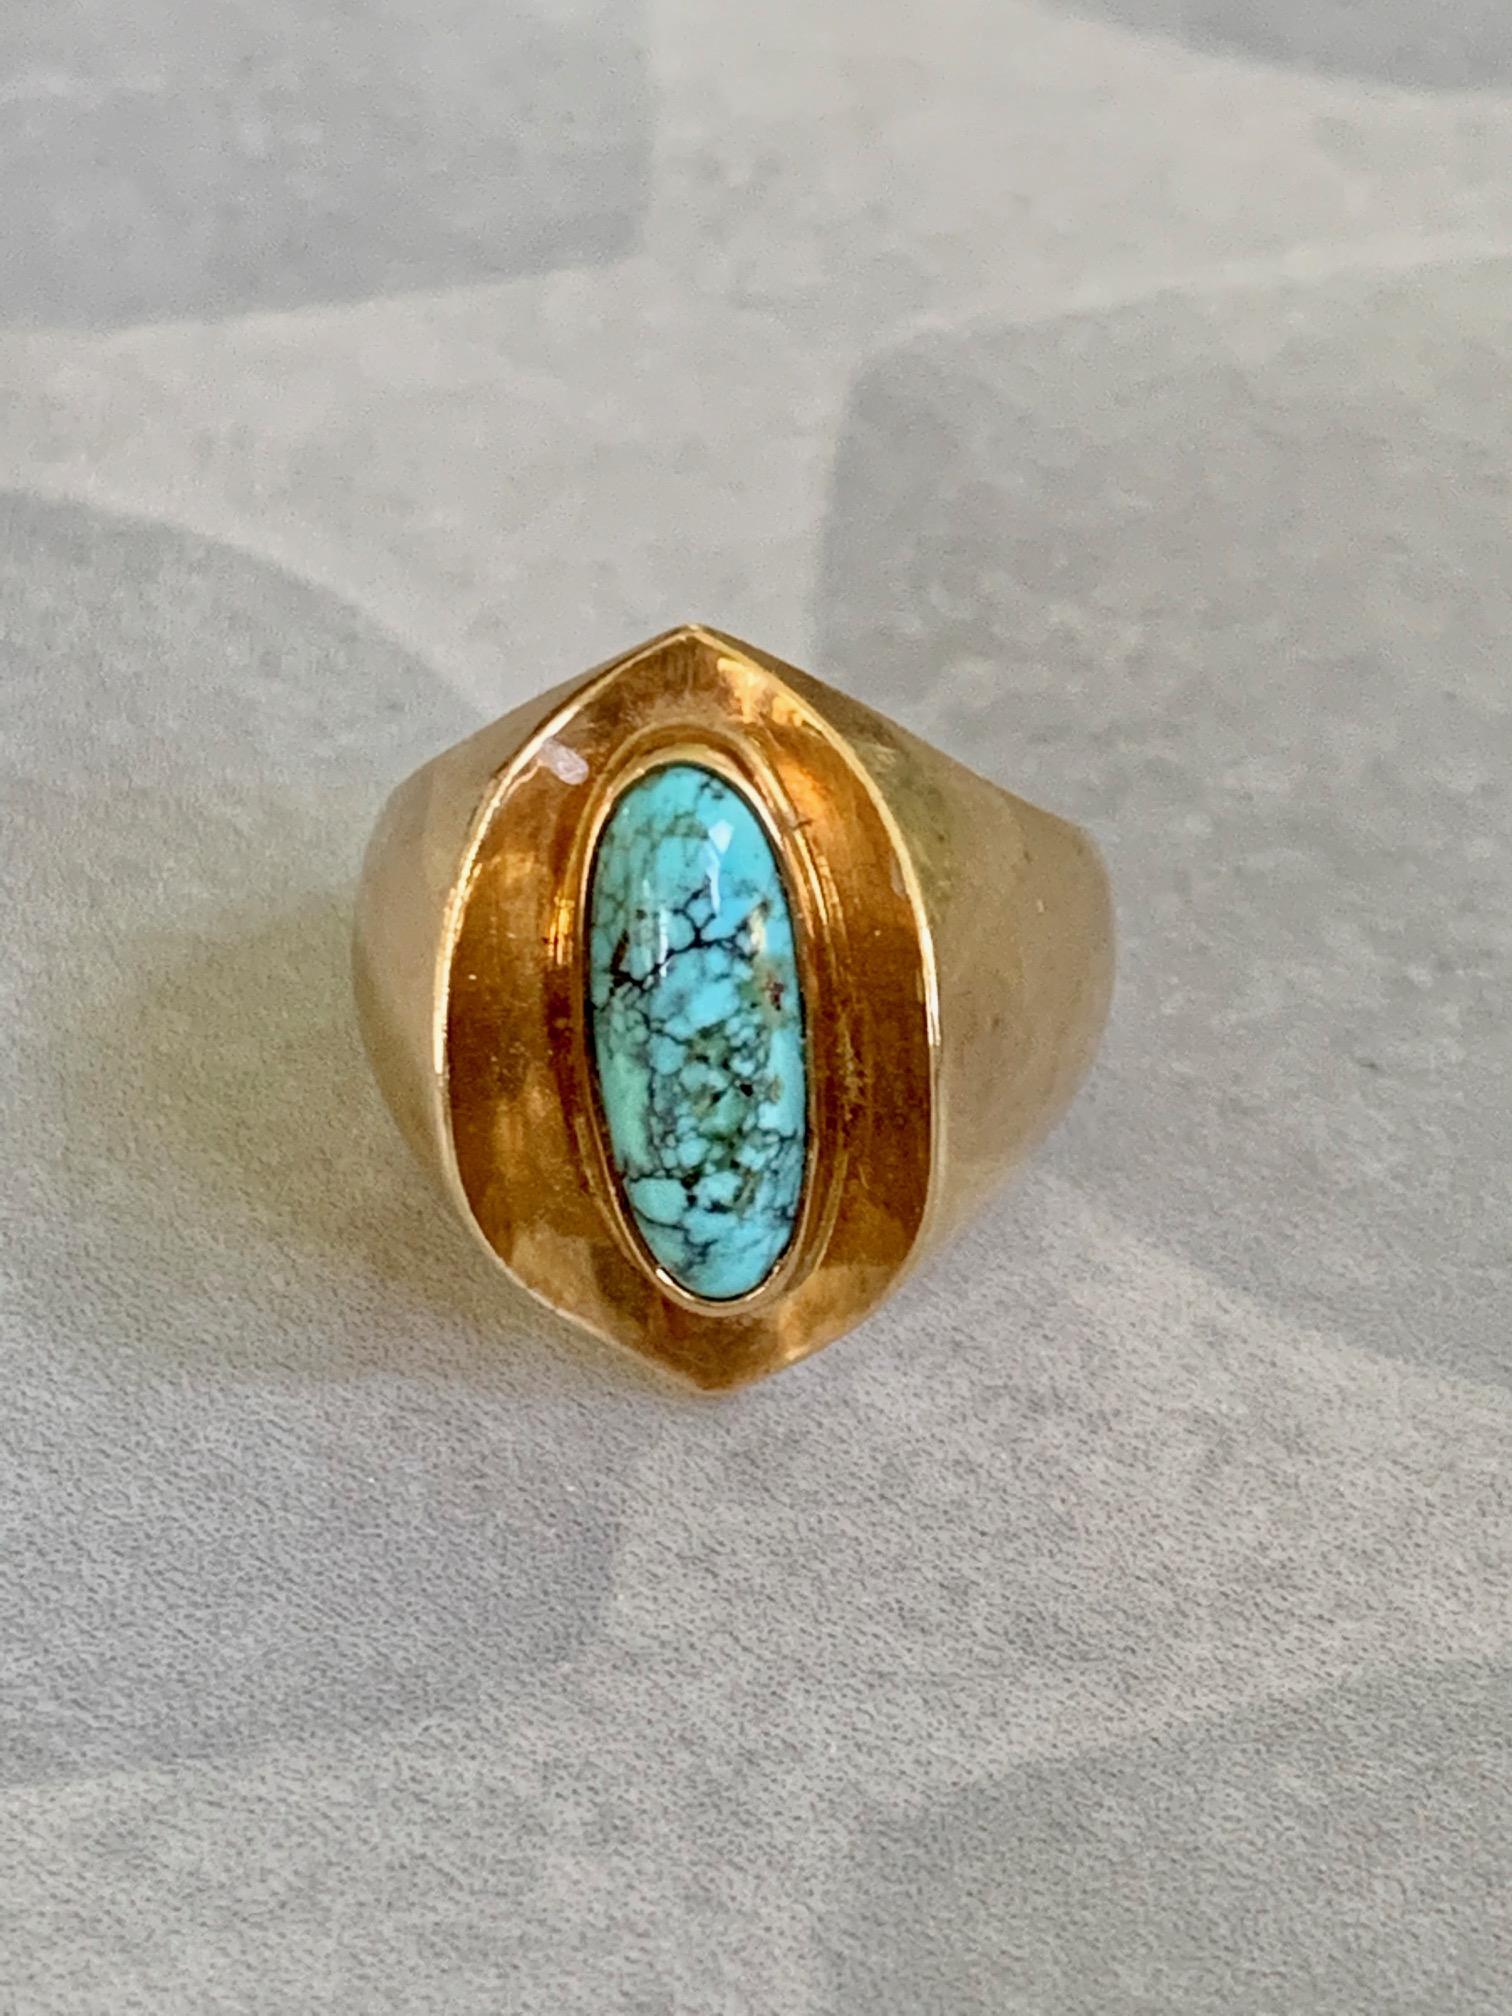 This signed Poul Warmind Denman Turquoise ring is a unique with its pairing of a turquoise stone set in a 18k gold setting.  Absolutely beautiful.

This ring features 1 oval, cabochon, Turquoise = approximately 14 x 7mm.

Size: 6

Weight: 8.4